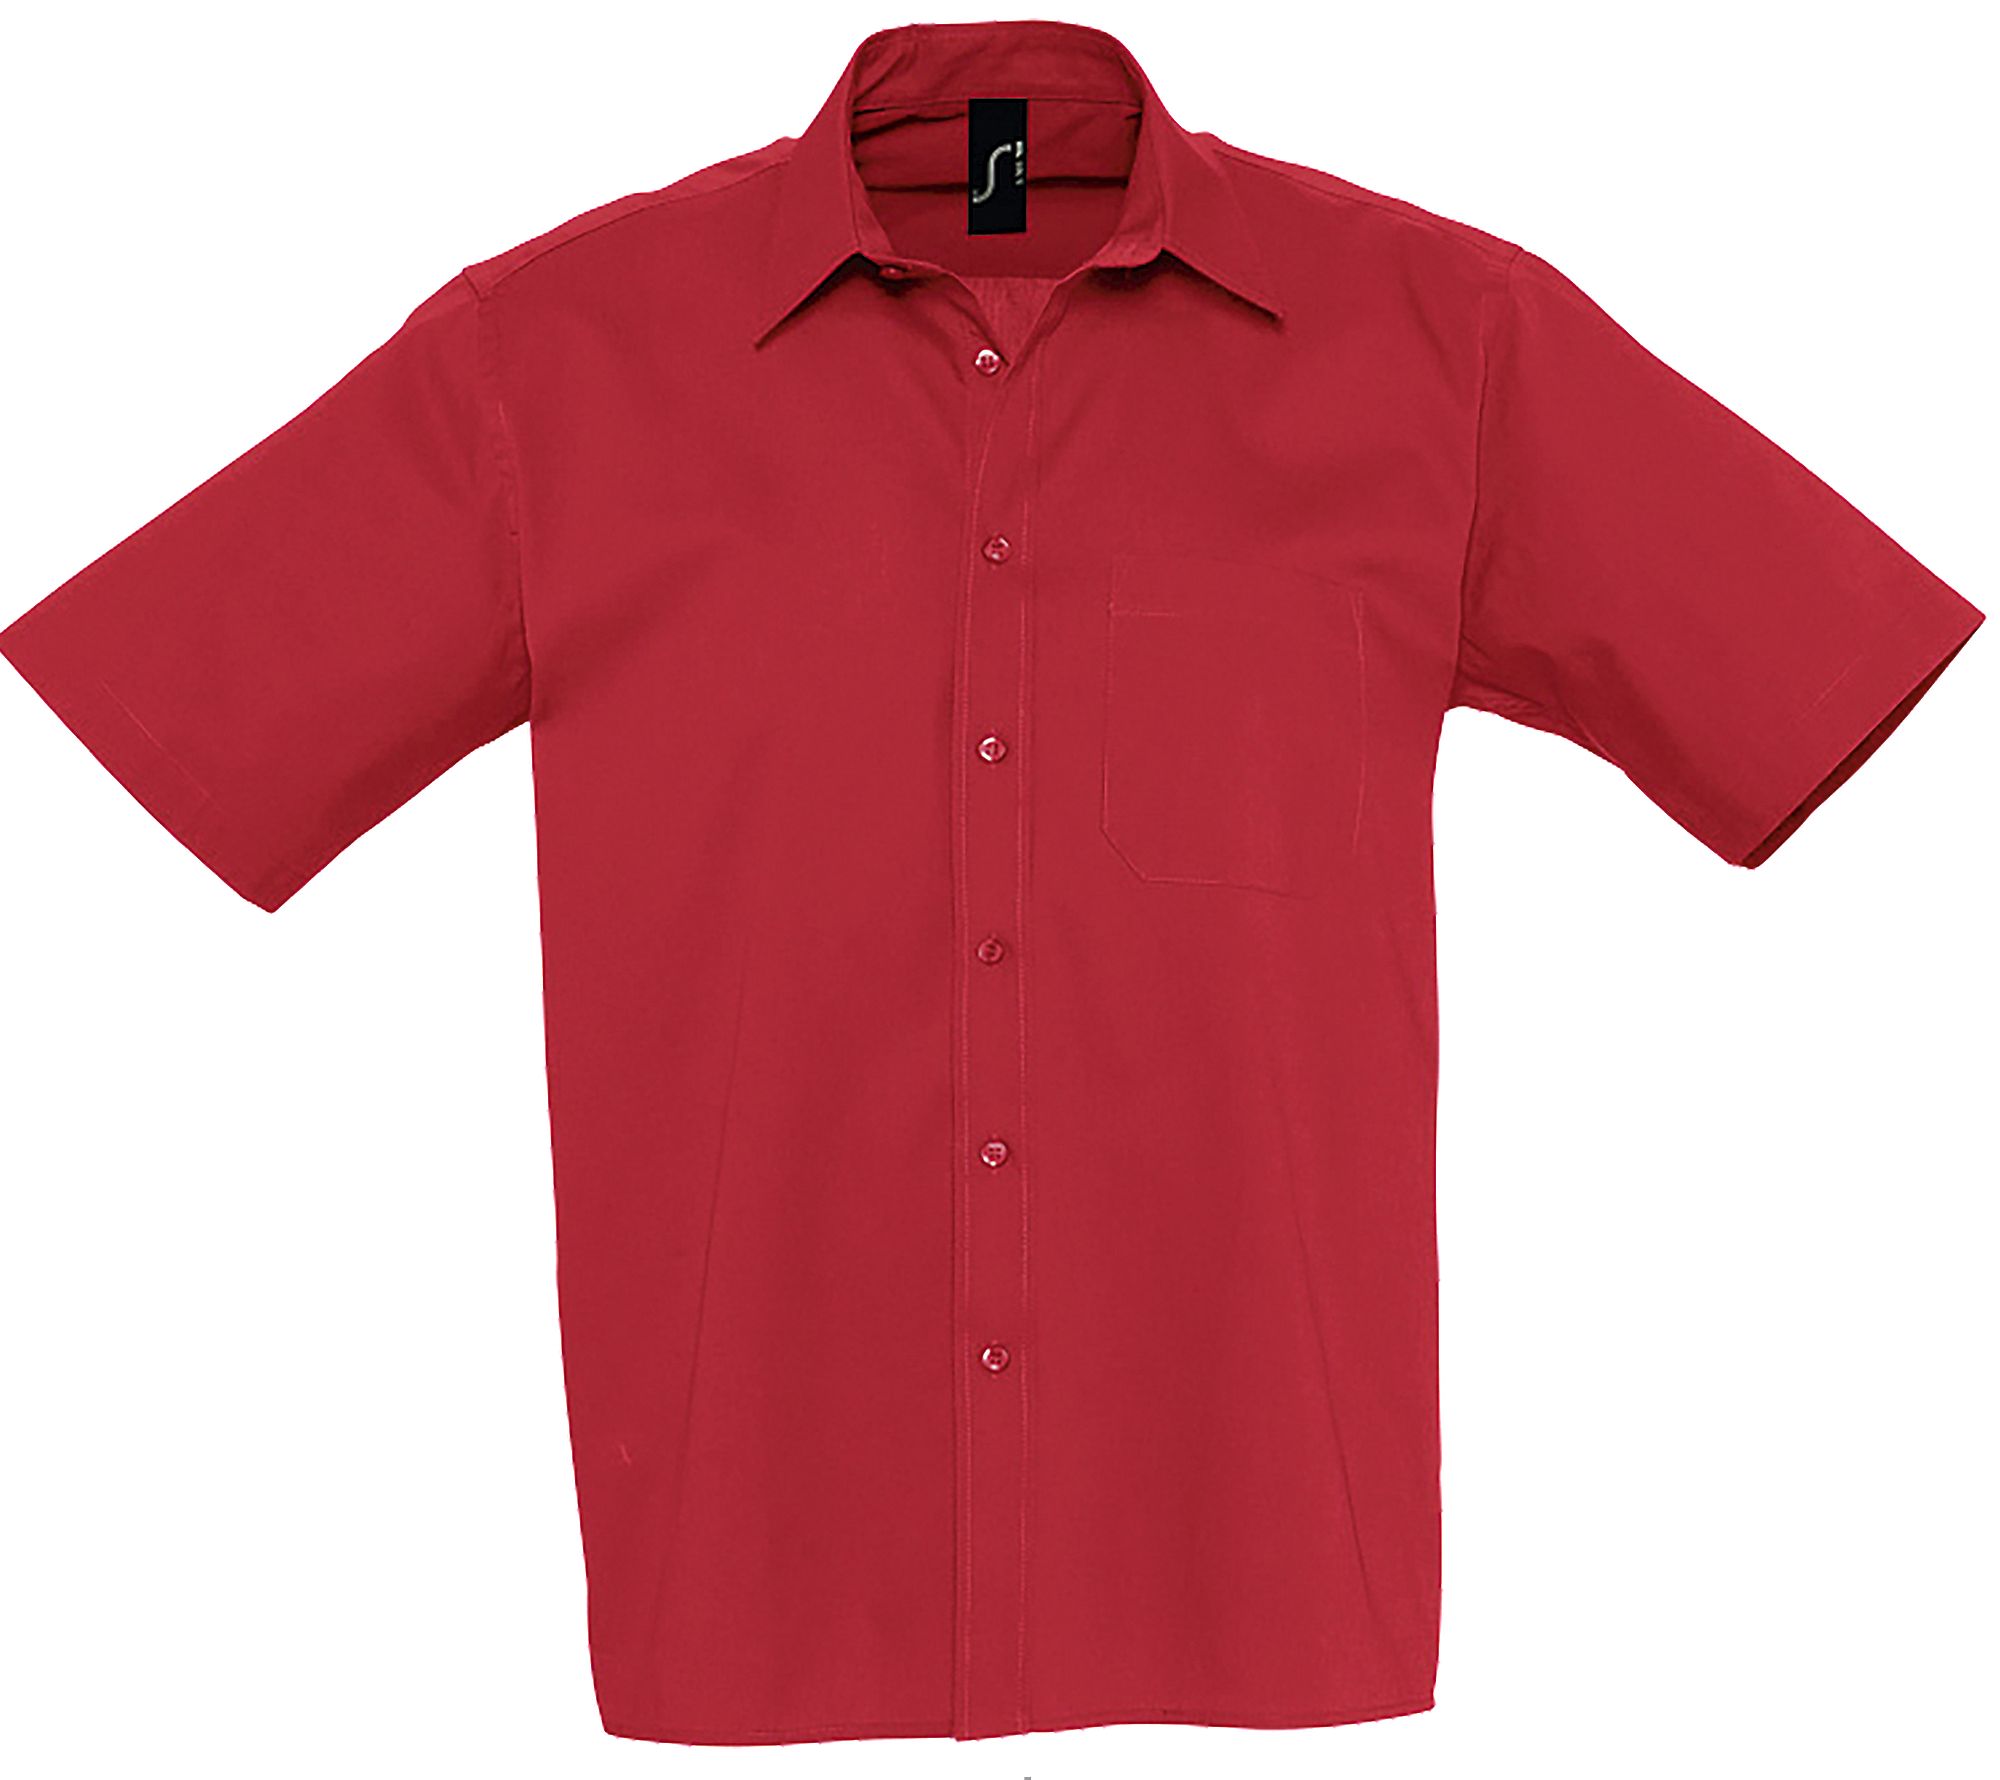 CHEMISE HOMME POPELINE MANCHES COURTES BERKELEY Rouge flamenco Rouge